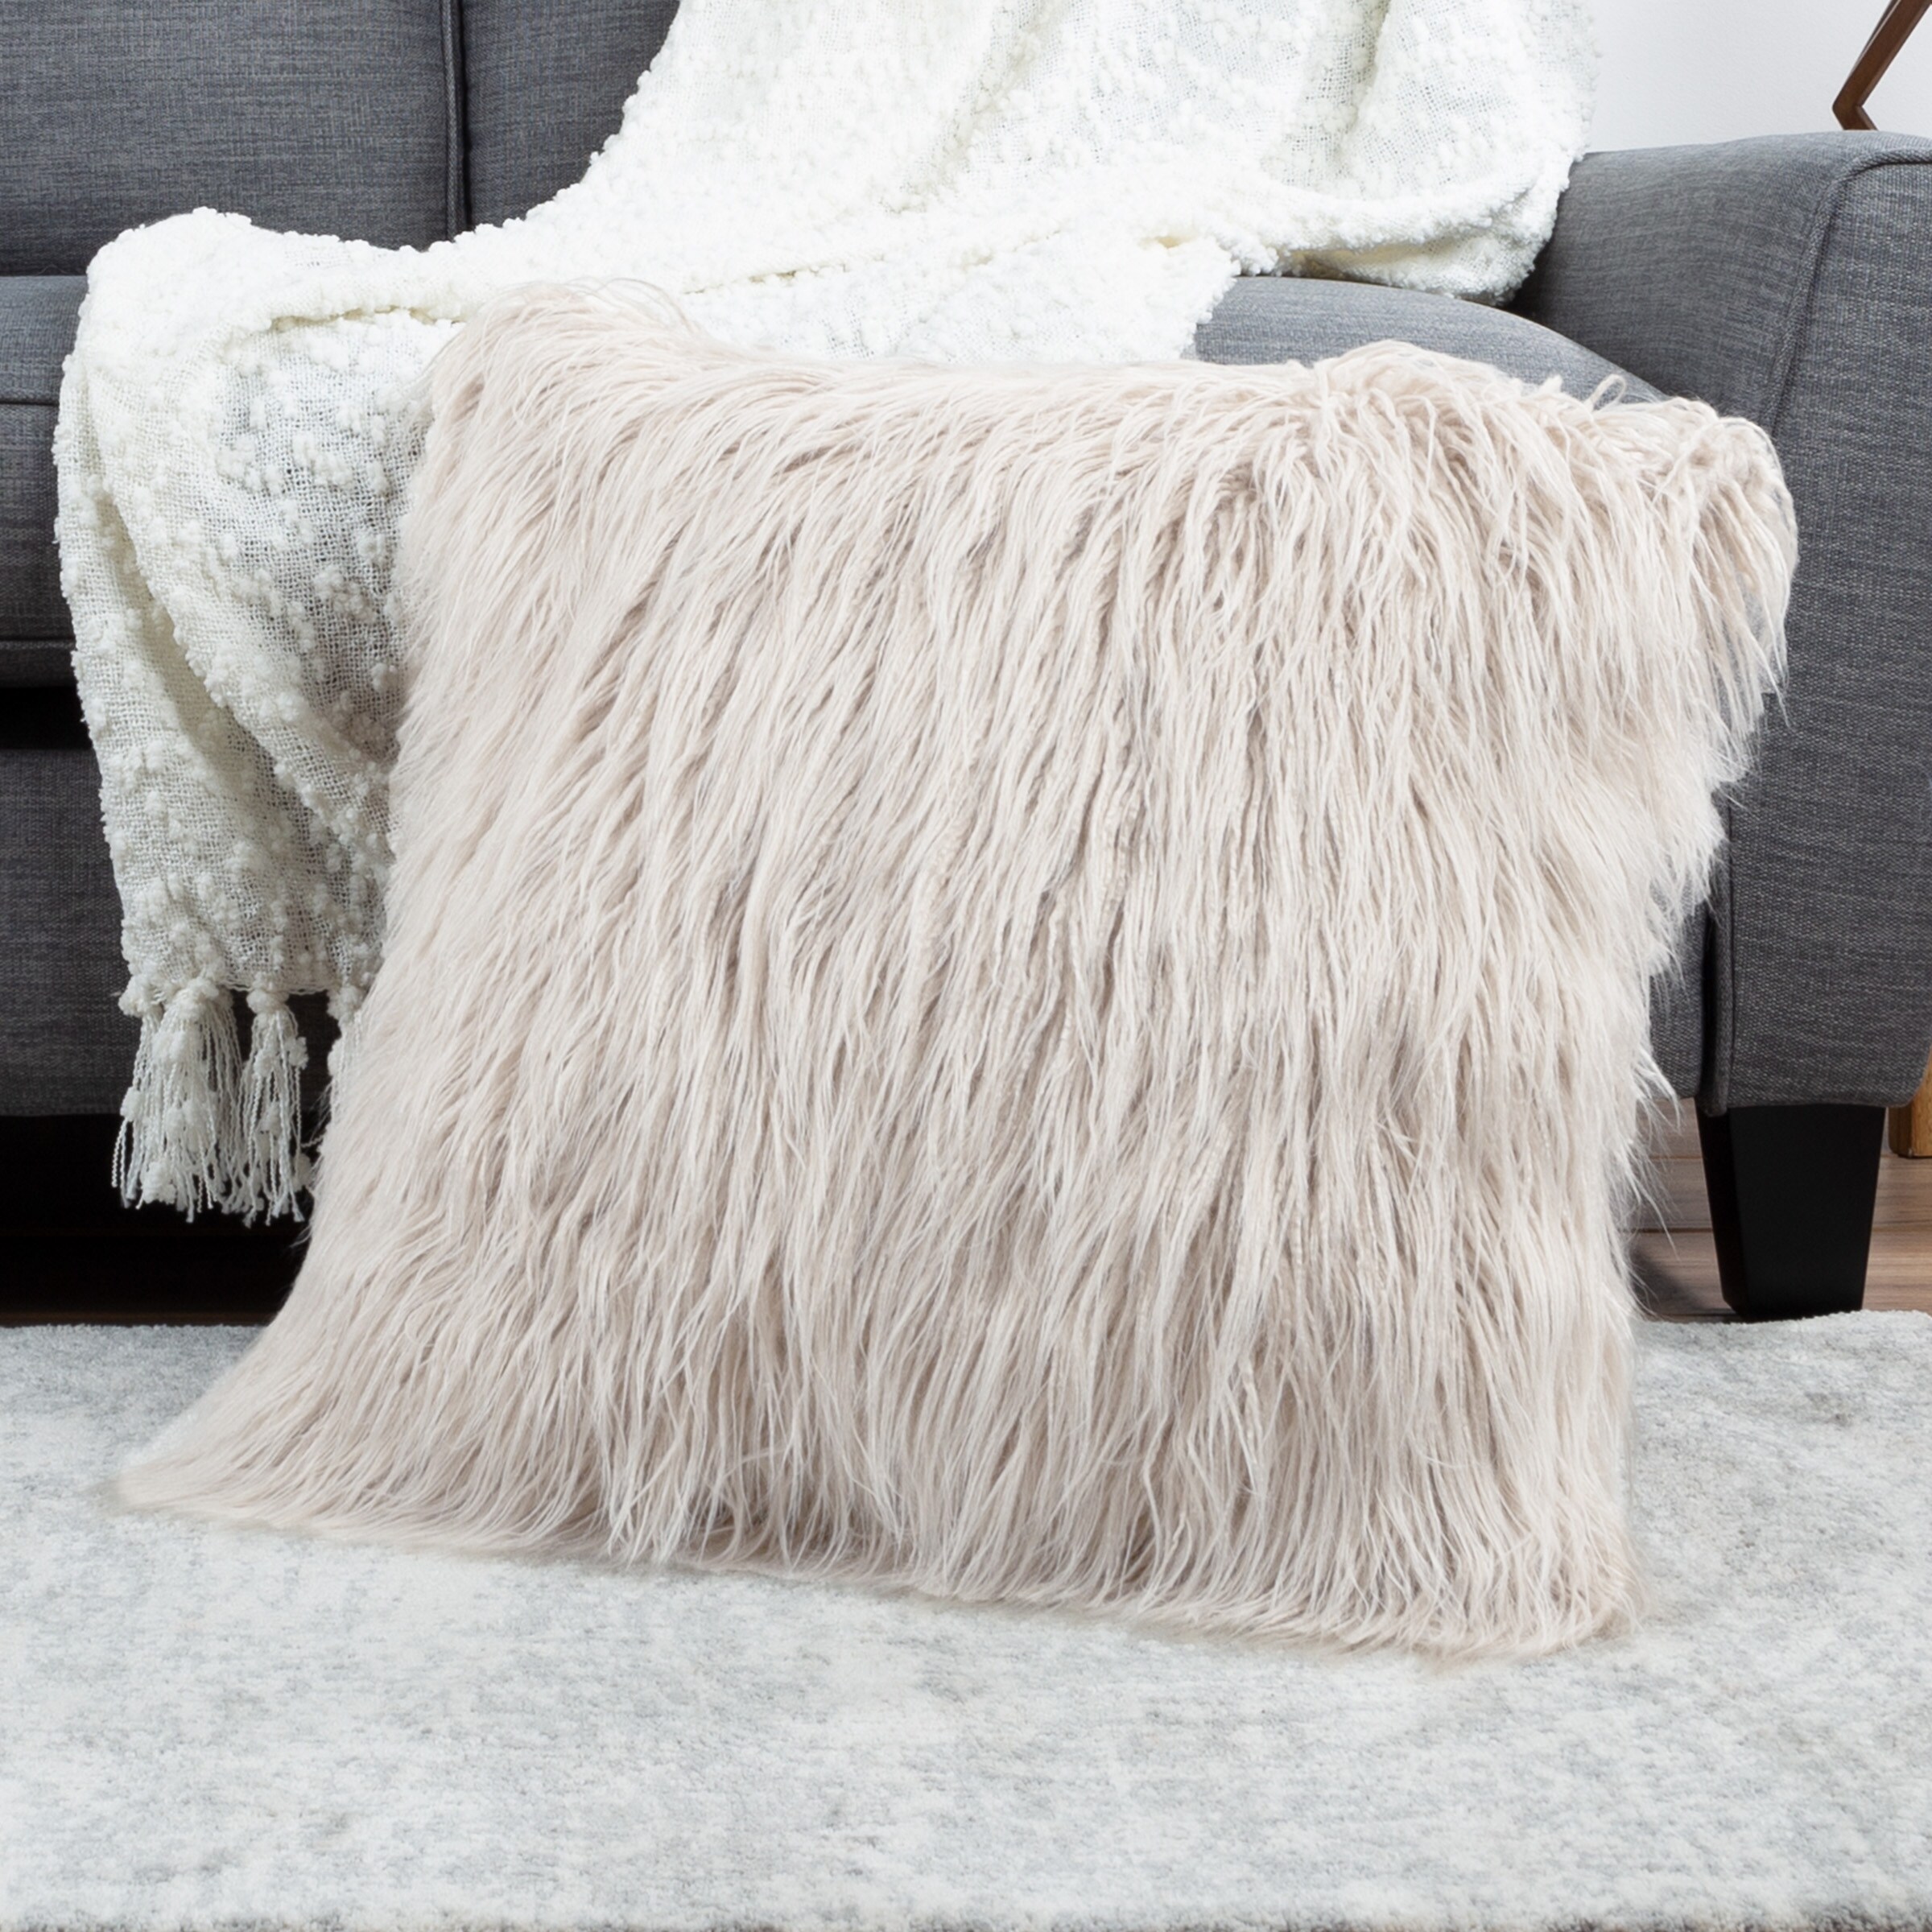 https://ak1.ostkcdn.com/images/products/is/images/direct/d04f6ced3eeb1efb5200e4c08087fca350a26a2b/Hastings-Home-22%22-Mongolian-Faux-Fur-Pillow.jpg